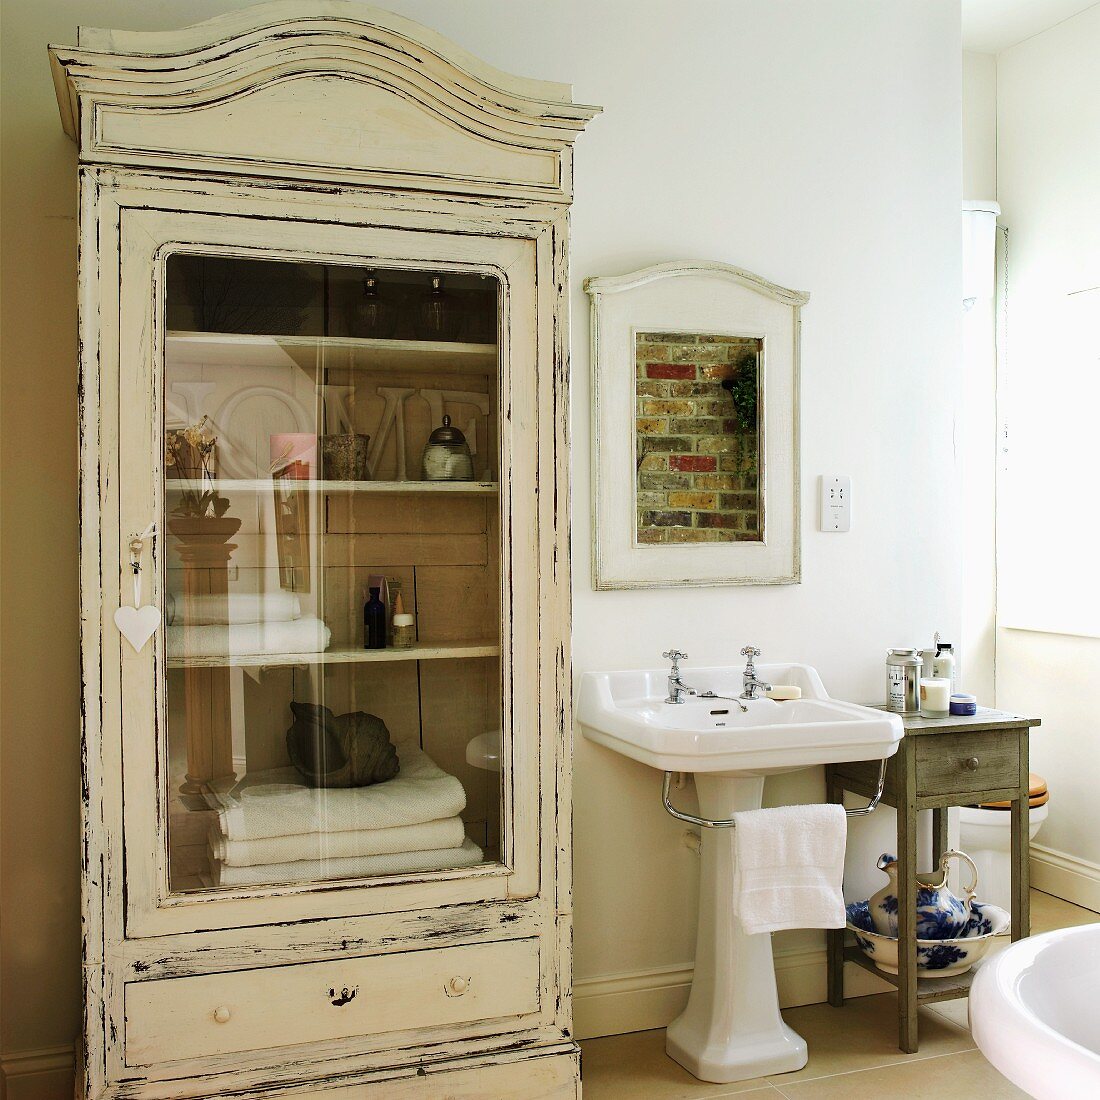 Glass-fronted, vintage-style cabinet and framed, unplastered section of brick masonry above pedestal sink